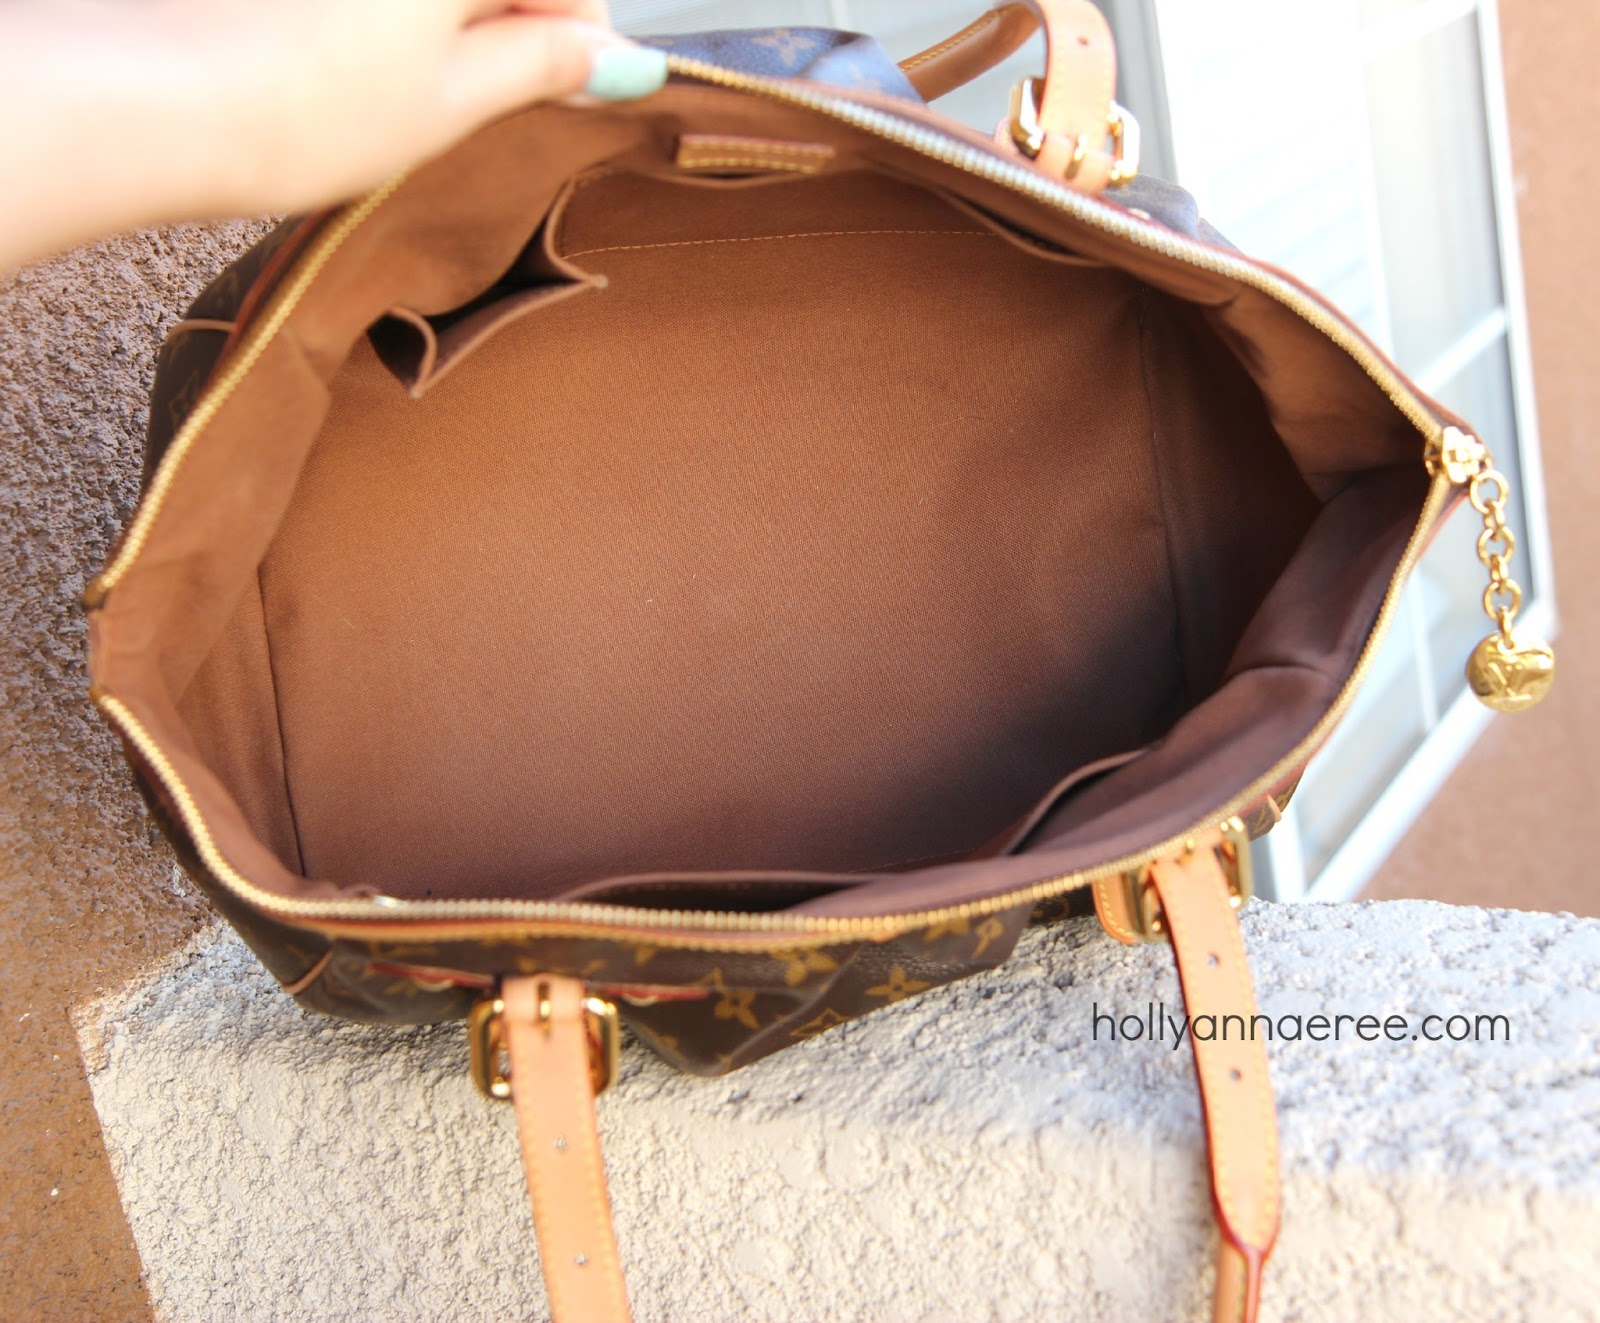 Holly Ann-AeRee 2.0: Mom's Well Loved Louis Vuitton Tivoli PM - FOR SALE